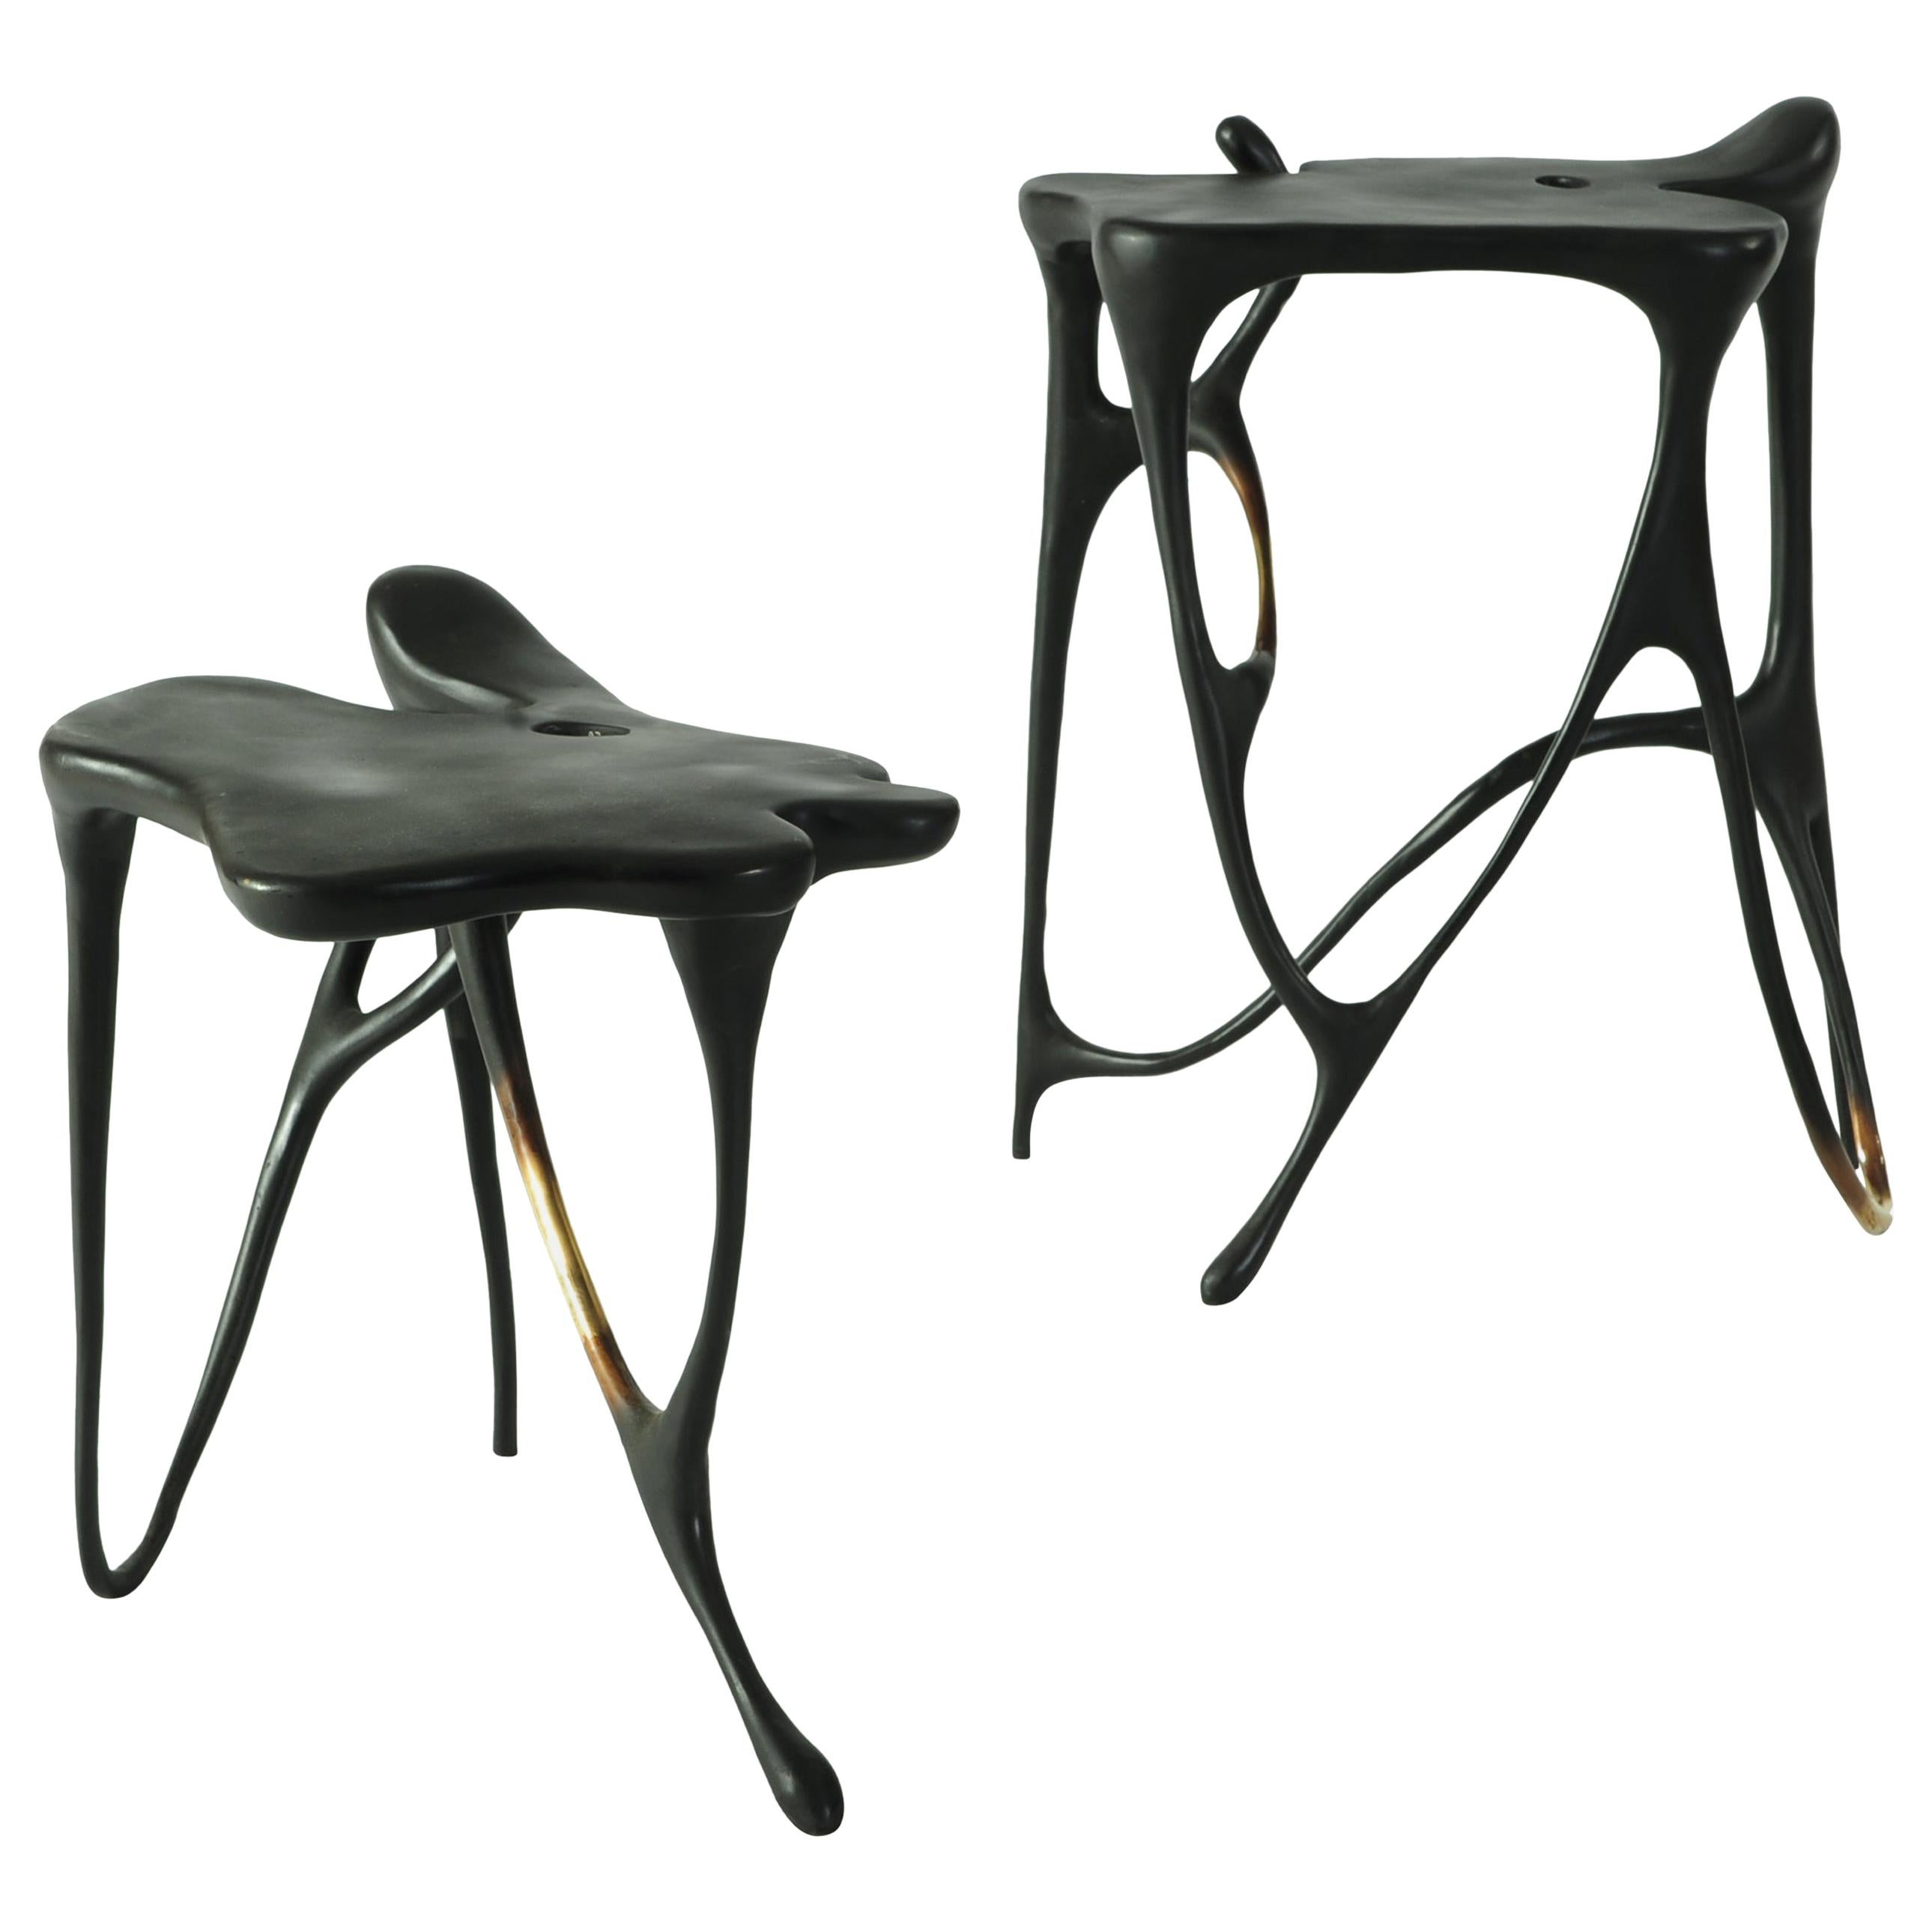 Pair of Calligraphic Sculpted Brass Side Tables by Misaya For Sale